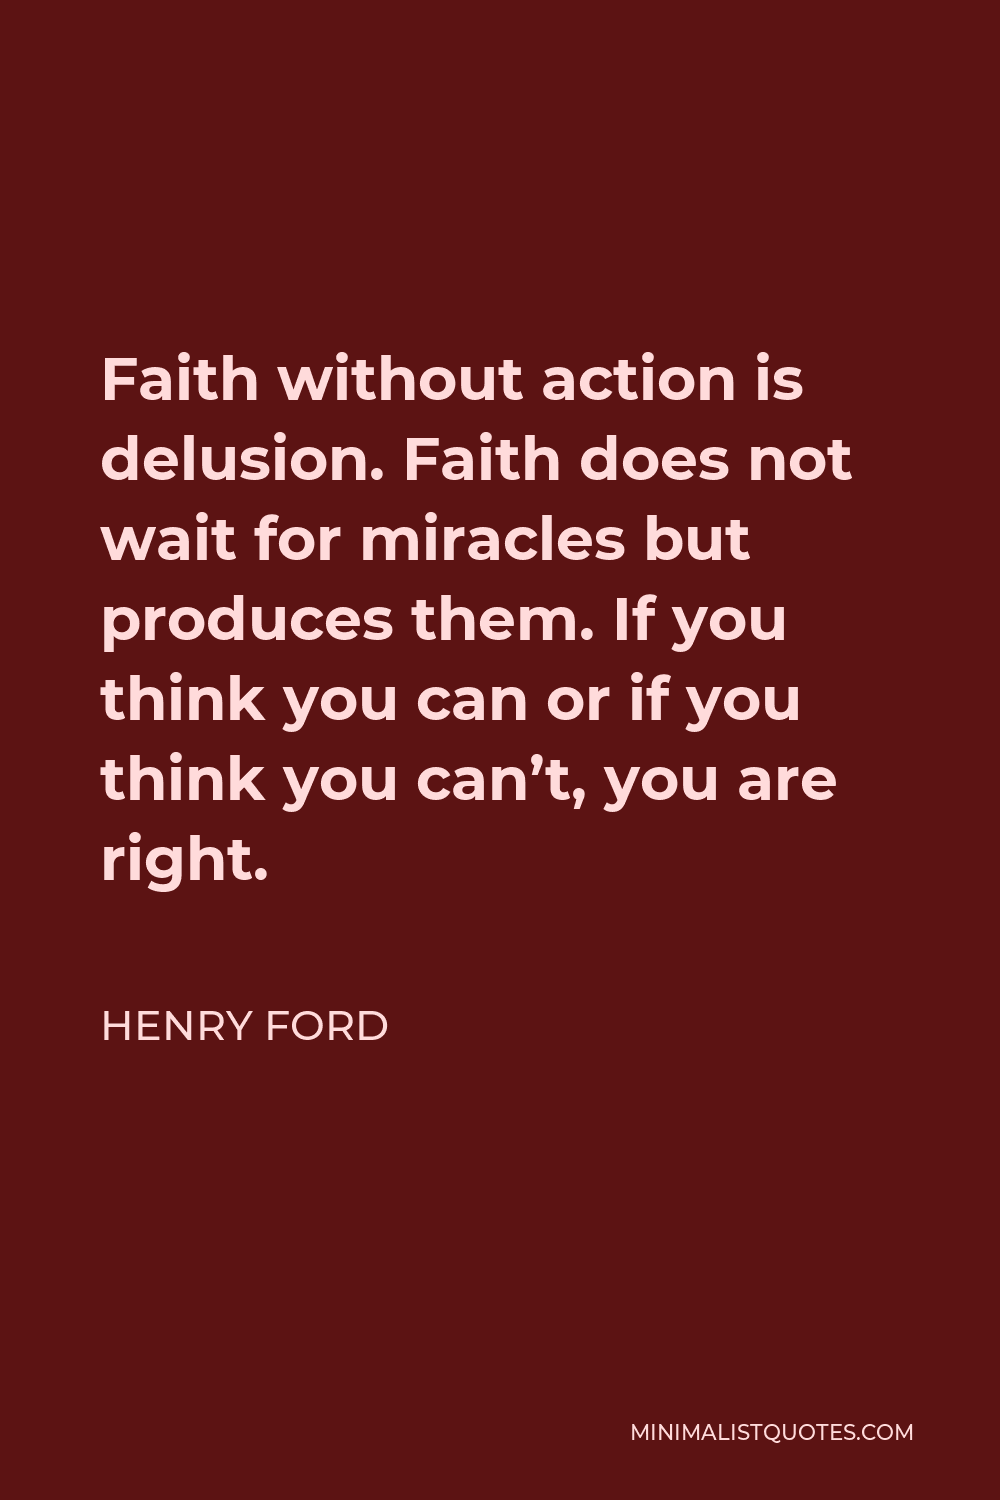 Henry Ford Quote - Faith without action is delusion. Faith does not wait for miracles but produces them. If you think you can or if you think you can’t, you are right.